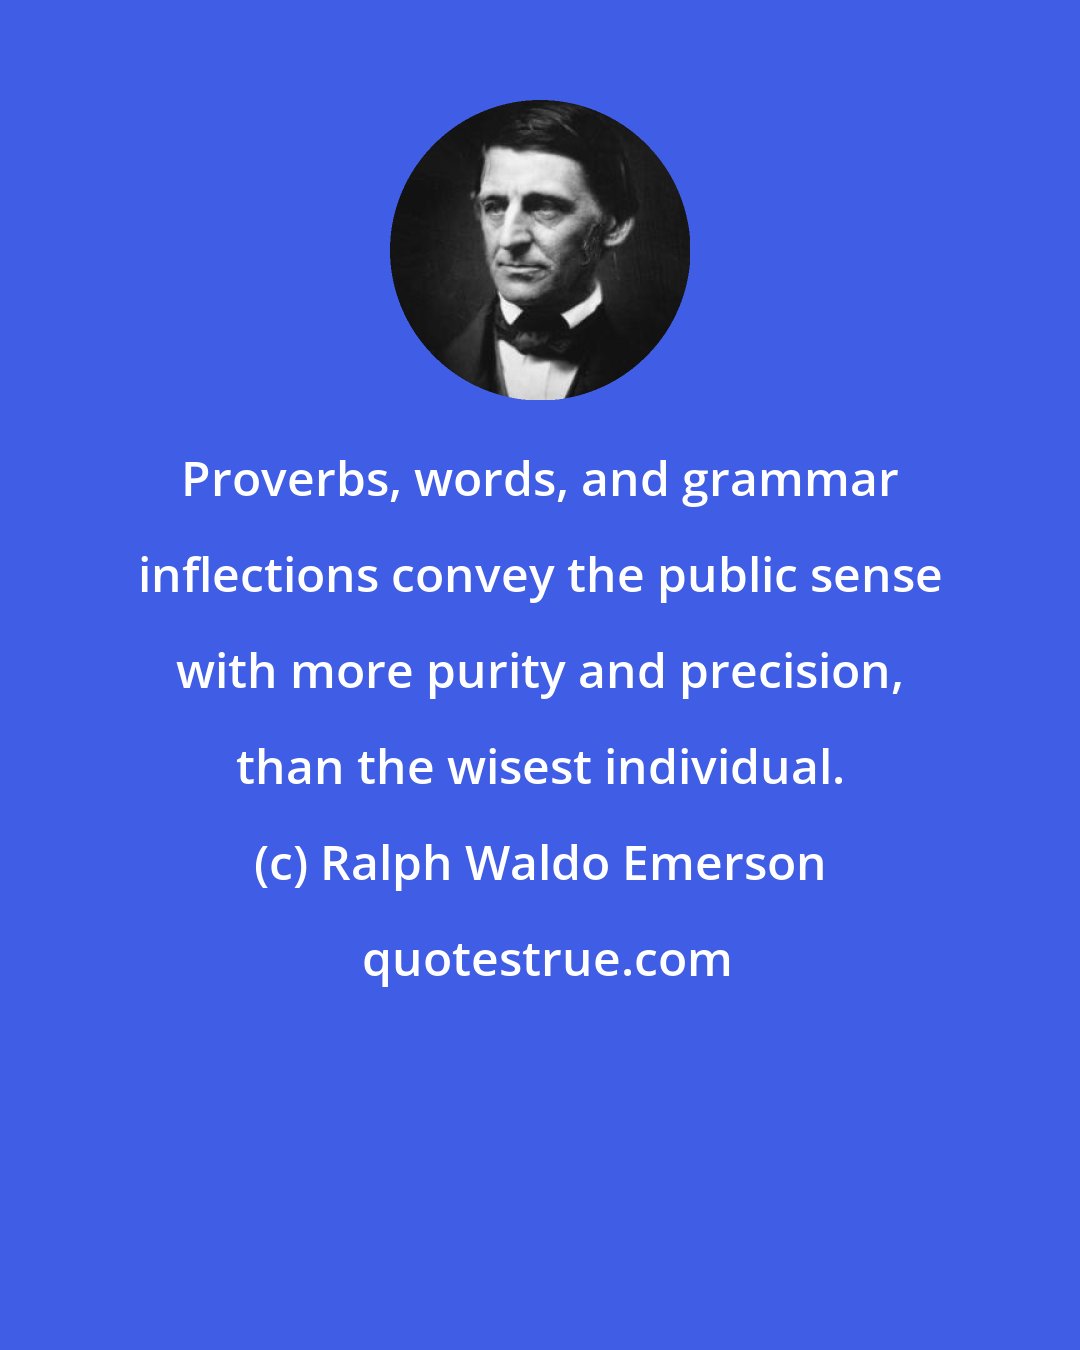 Ralph Waldo Emerson: Proverbs, words, and grammar inflections convey the public sense with more purity and precision, than the wisest individual.